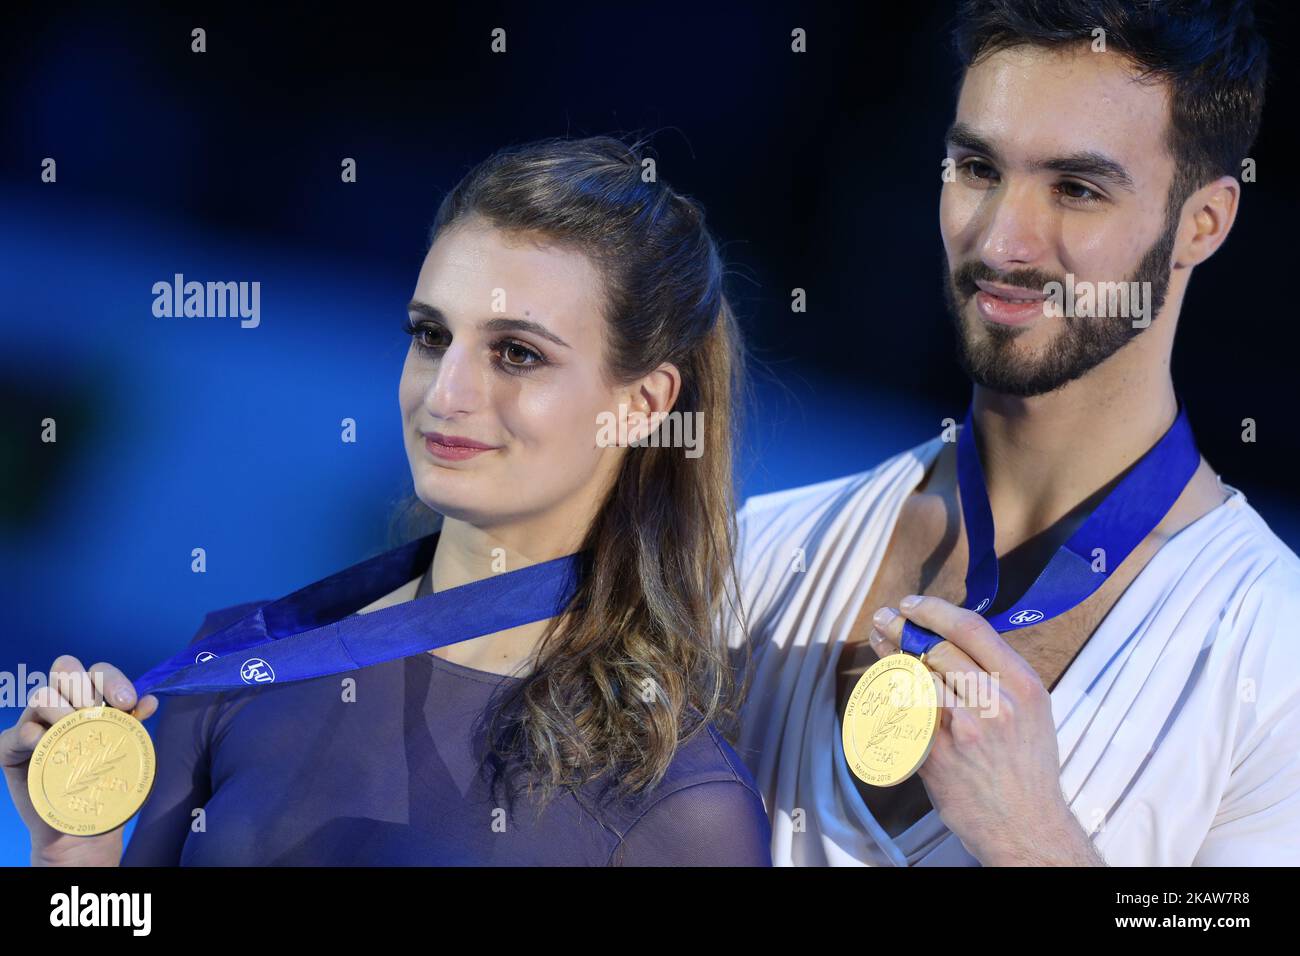 Gold medallists Gabriella Papadakis and Guillaume Cizeron of France pose with their medals after the ice dance free dance at the ISU European Figure Skating Championships in Moscow, on January 20, 2018. (Photo by Igor Russak/NurPhoto) Stock Photo